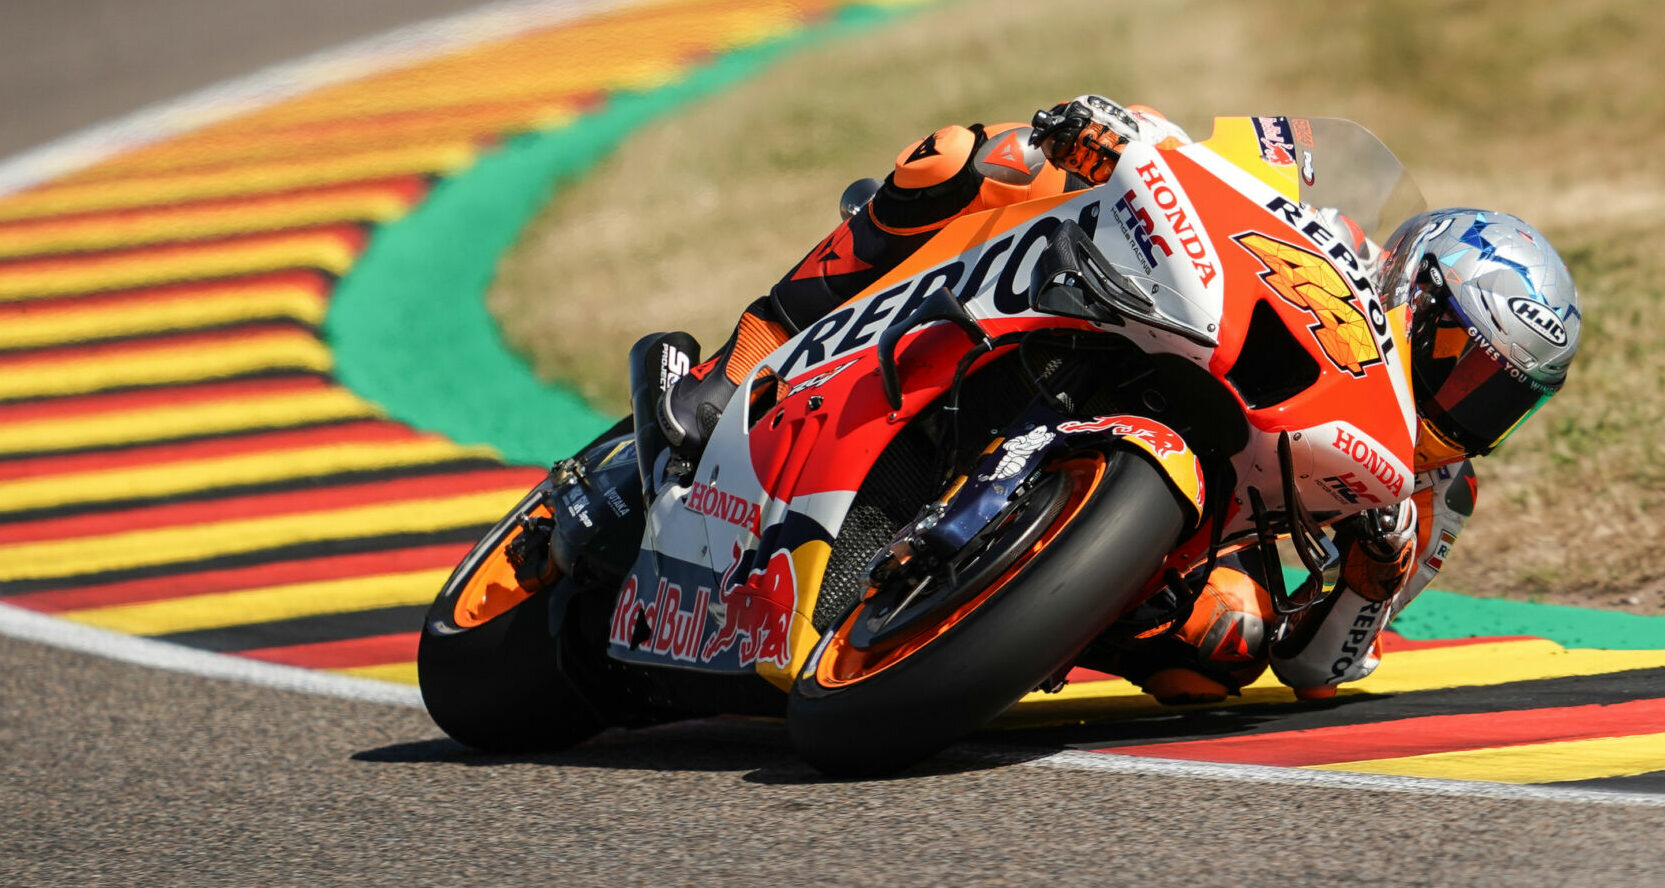 Pol Espargaro (44) in action at Sachsenring - his third consecutive race with zero points scored. Photo courtesy Repsol Honda.